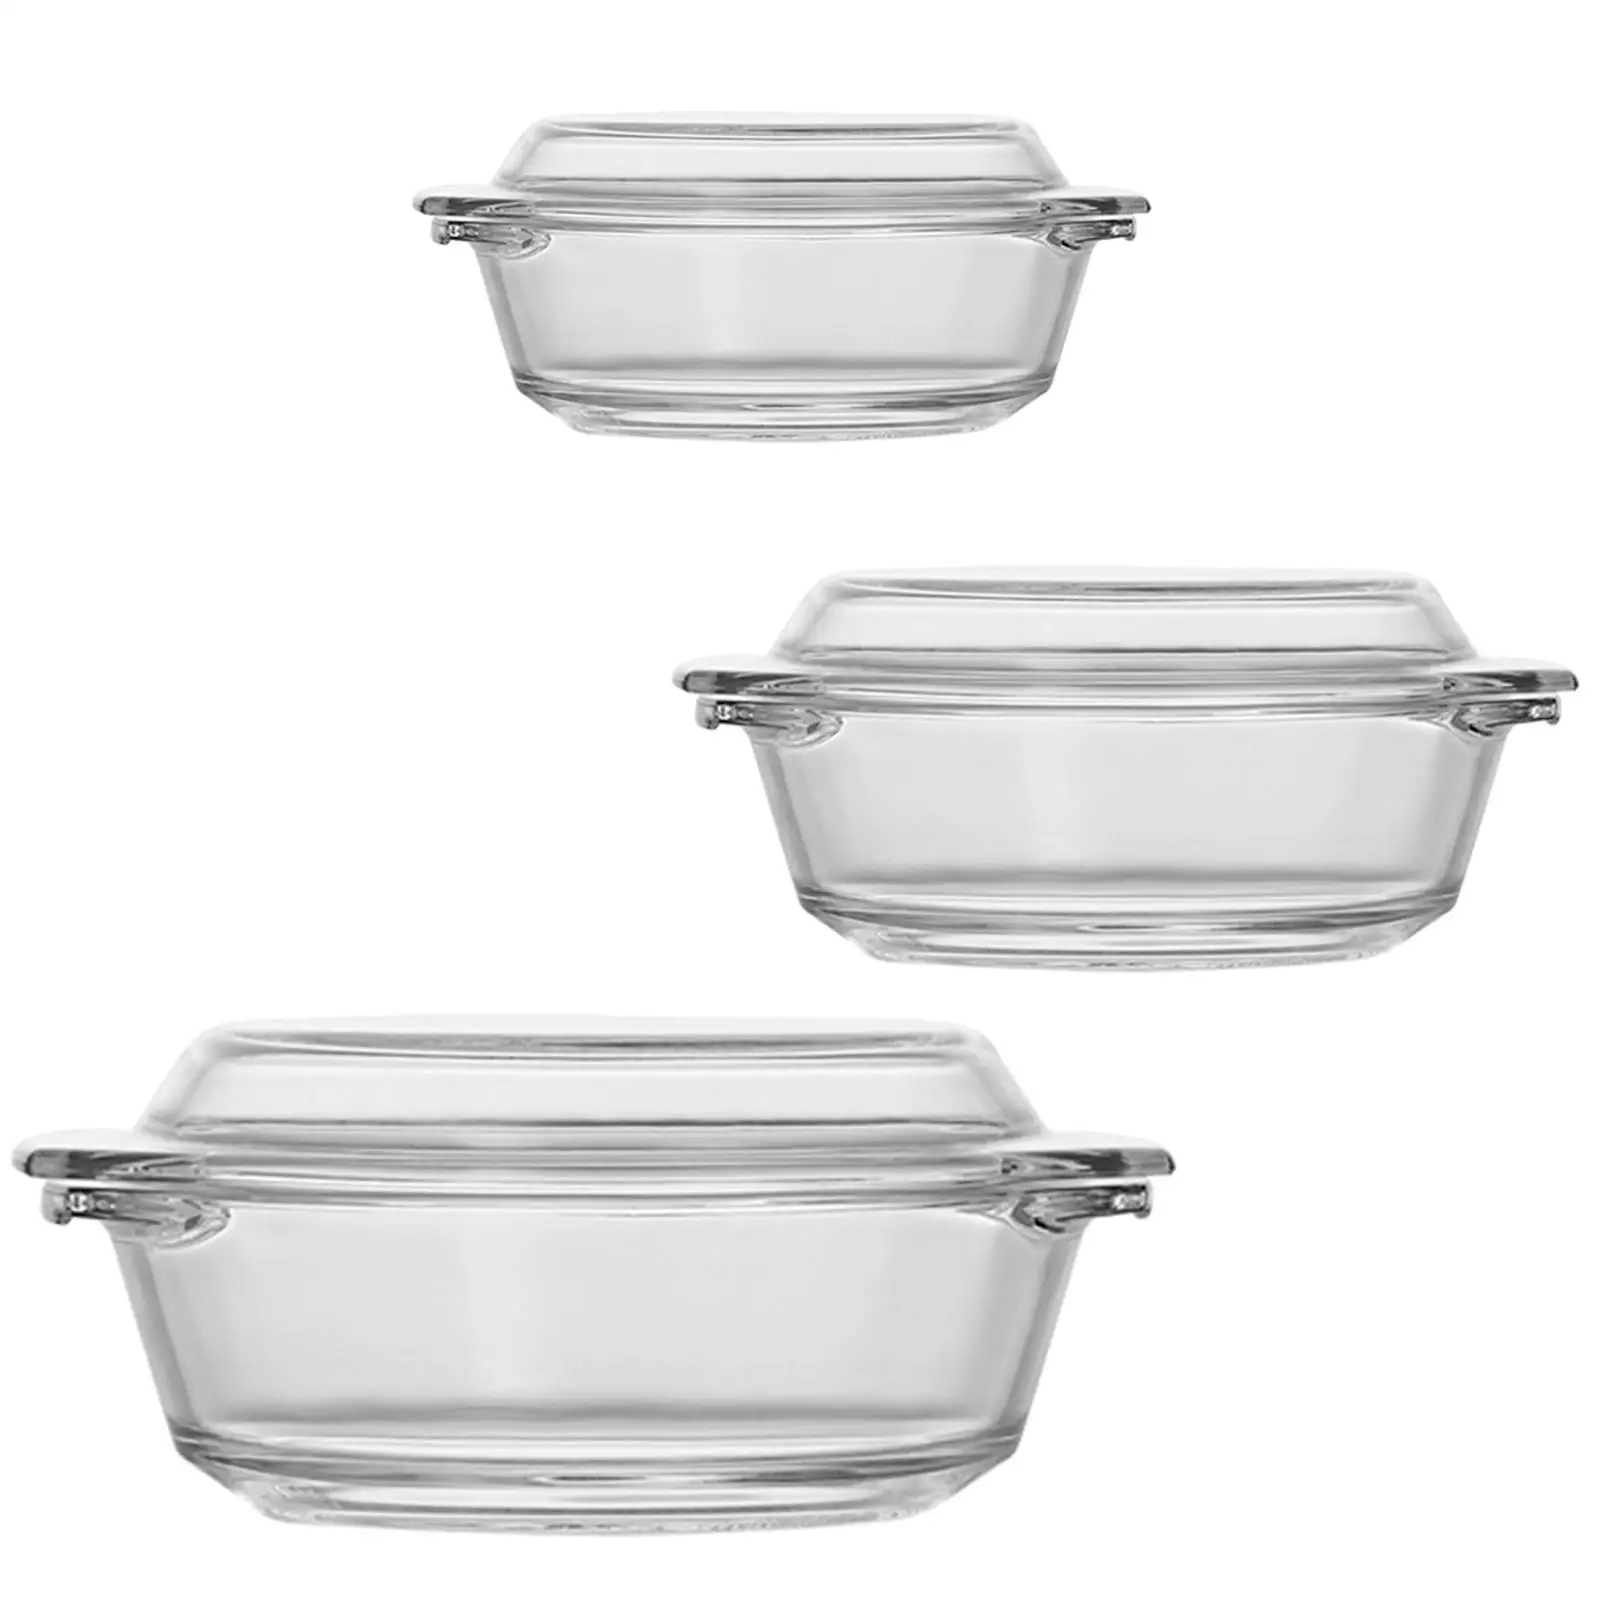 Glass Cereal Bowls with Handles with Lid Soup Bowl for Noodles Pasta Milk